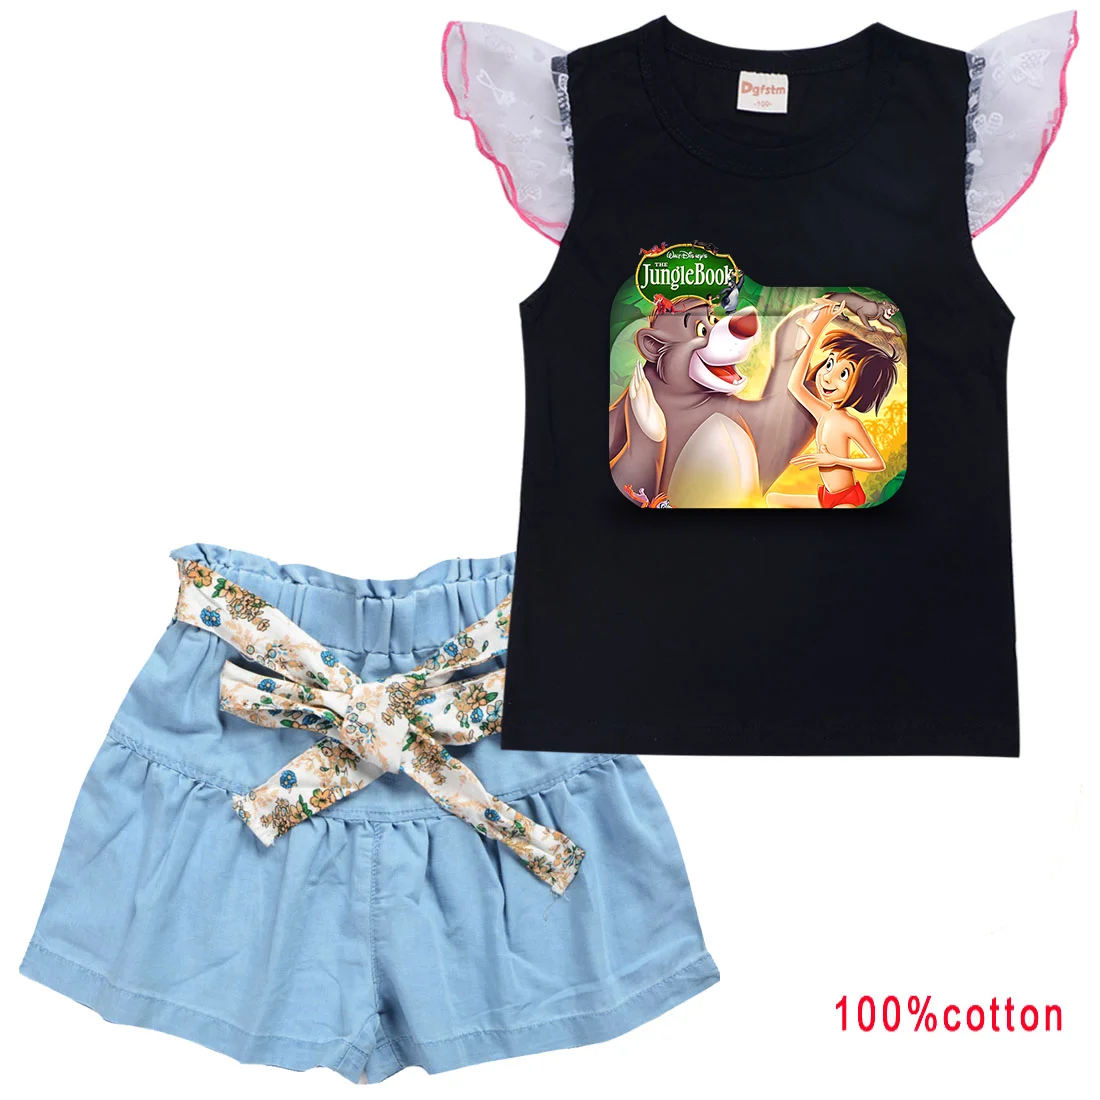 

2pc/Sets Disney The Jungle Book Girls Clothing Outfits Summer T-shirt Shorts Clothes Casual Sports Tracksuits